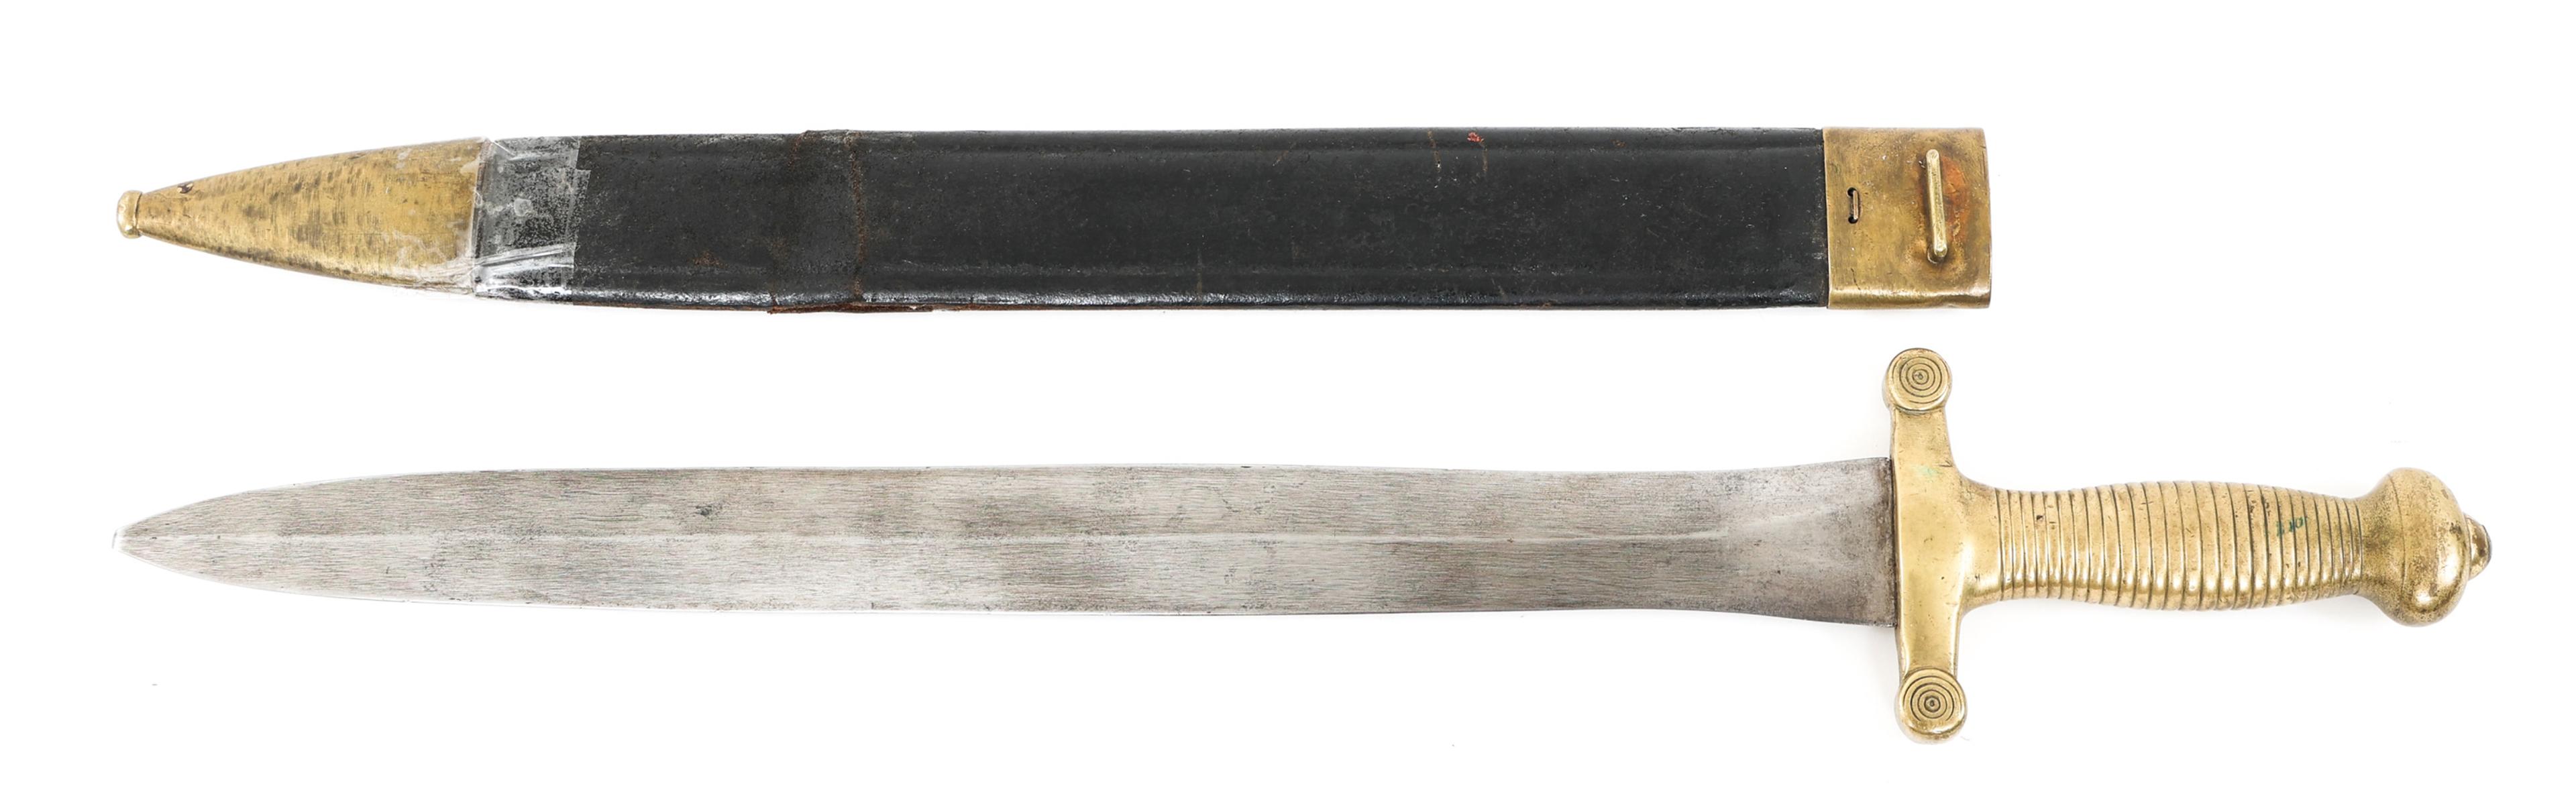 FRENCH M1831 FOOT ARTILLERY SWORD